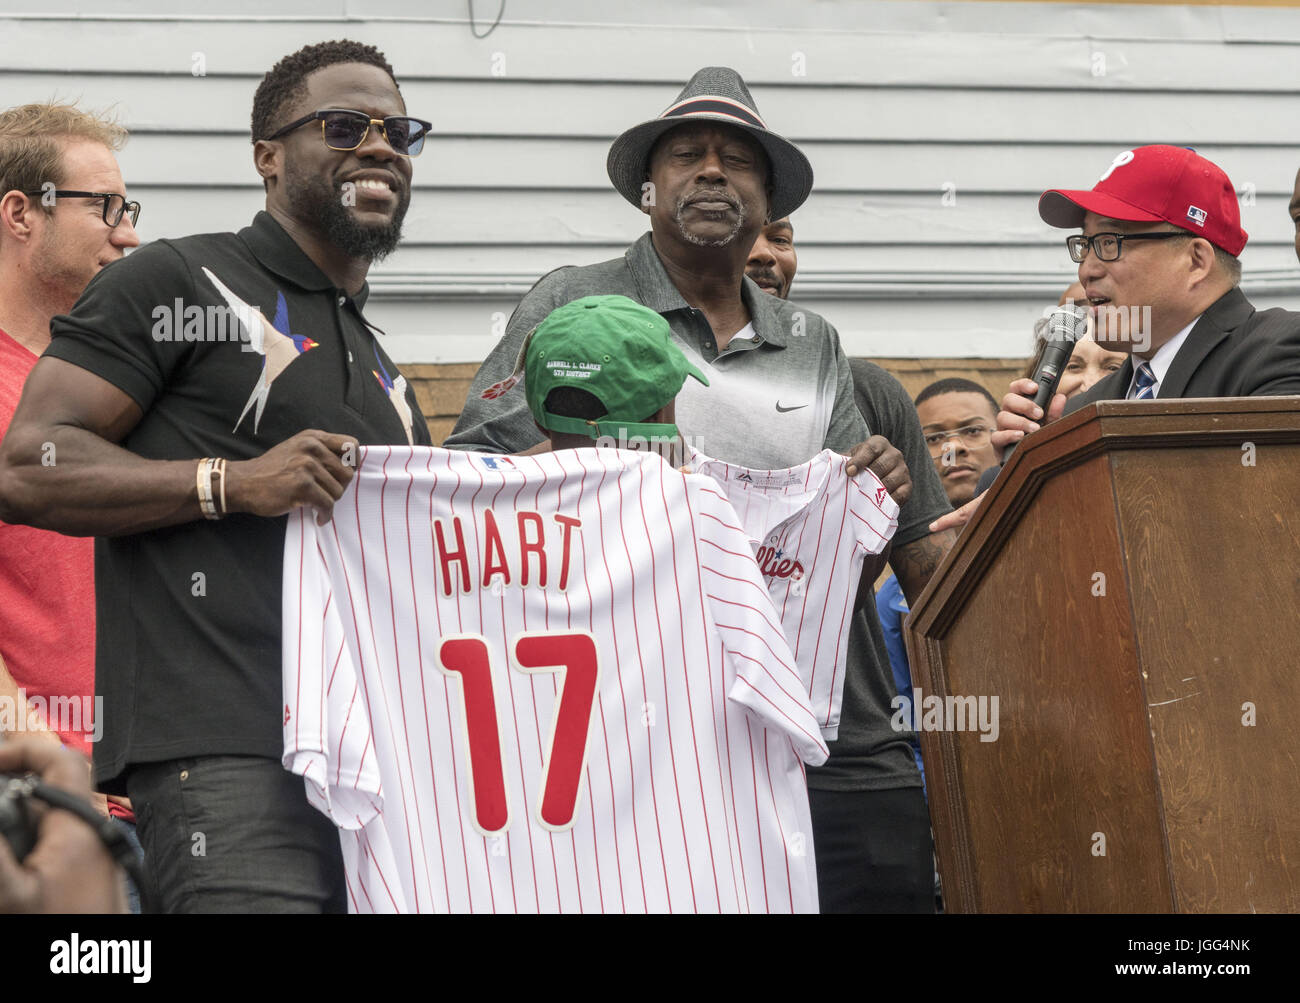 Philadelphia, Pennsylvania, USA. 6th July, 2017. KEVIN HART, comedian, author, and actor, is present with a Phillies Jersey from former Phillies player, GARY MATTHEWS, at the Kevin Hart Day celebration. The City of Philadelphia celebrated Kevin Hart Day with a birthday celebration and Mural Dedication at his favorite cheesesteak restaurant, 'Max's Cheesesteaks' in the historic Germantown Ave section of Philadelphia Credit: Ricky Fitchett/ZUMA Wire/Alamy Live News Stock Photo